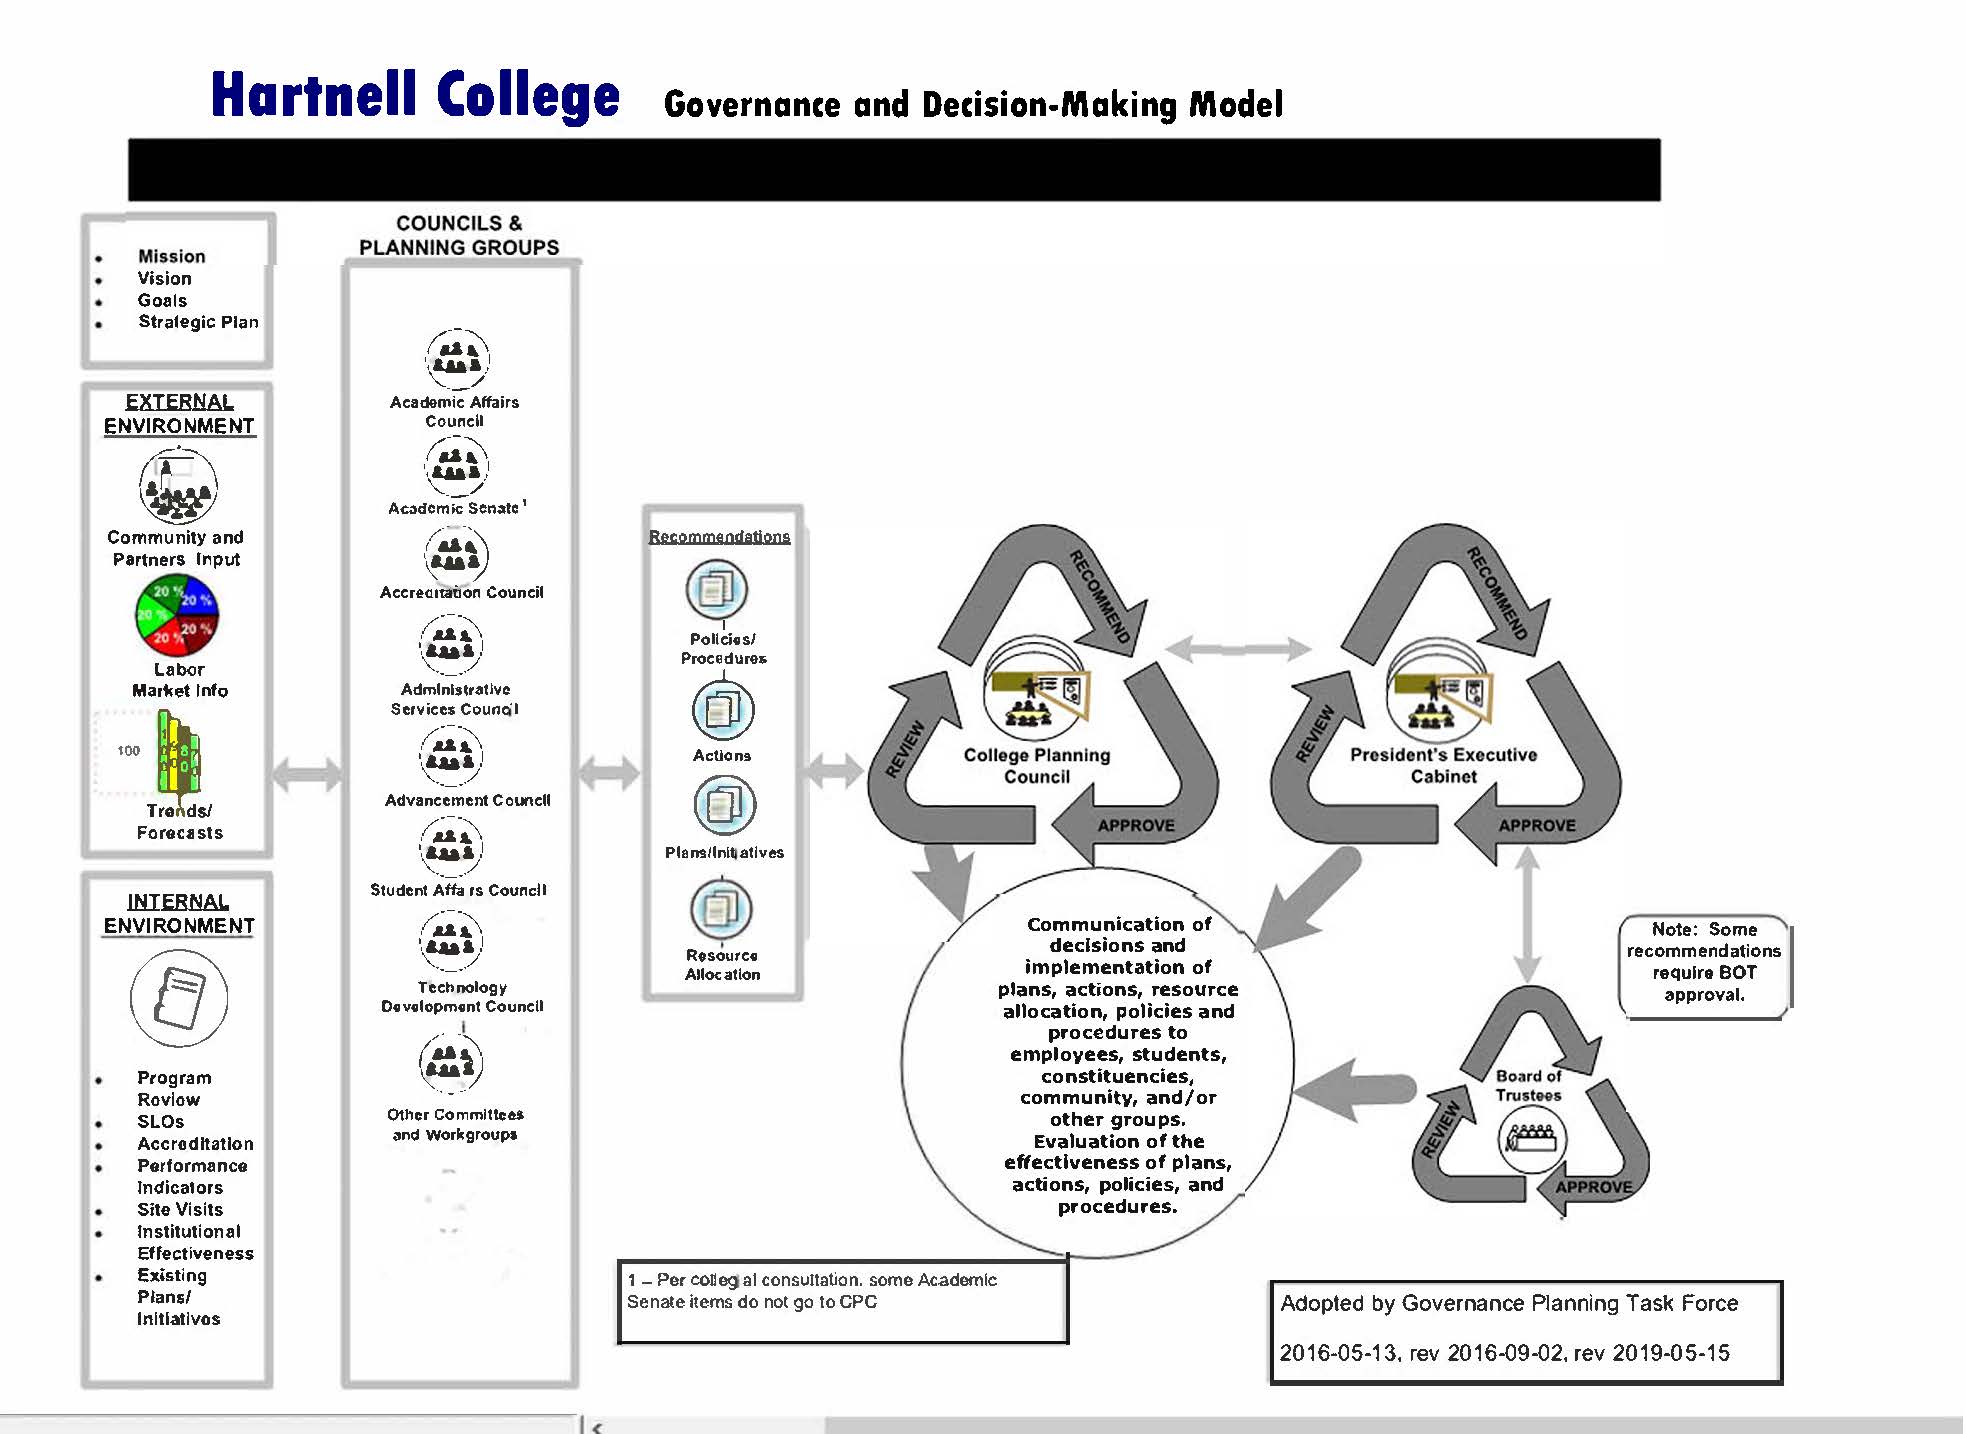 Governance System at Hartnell College